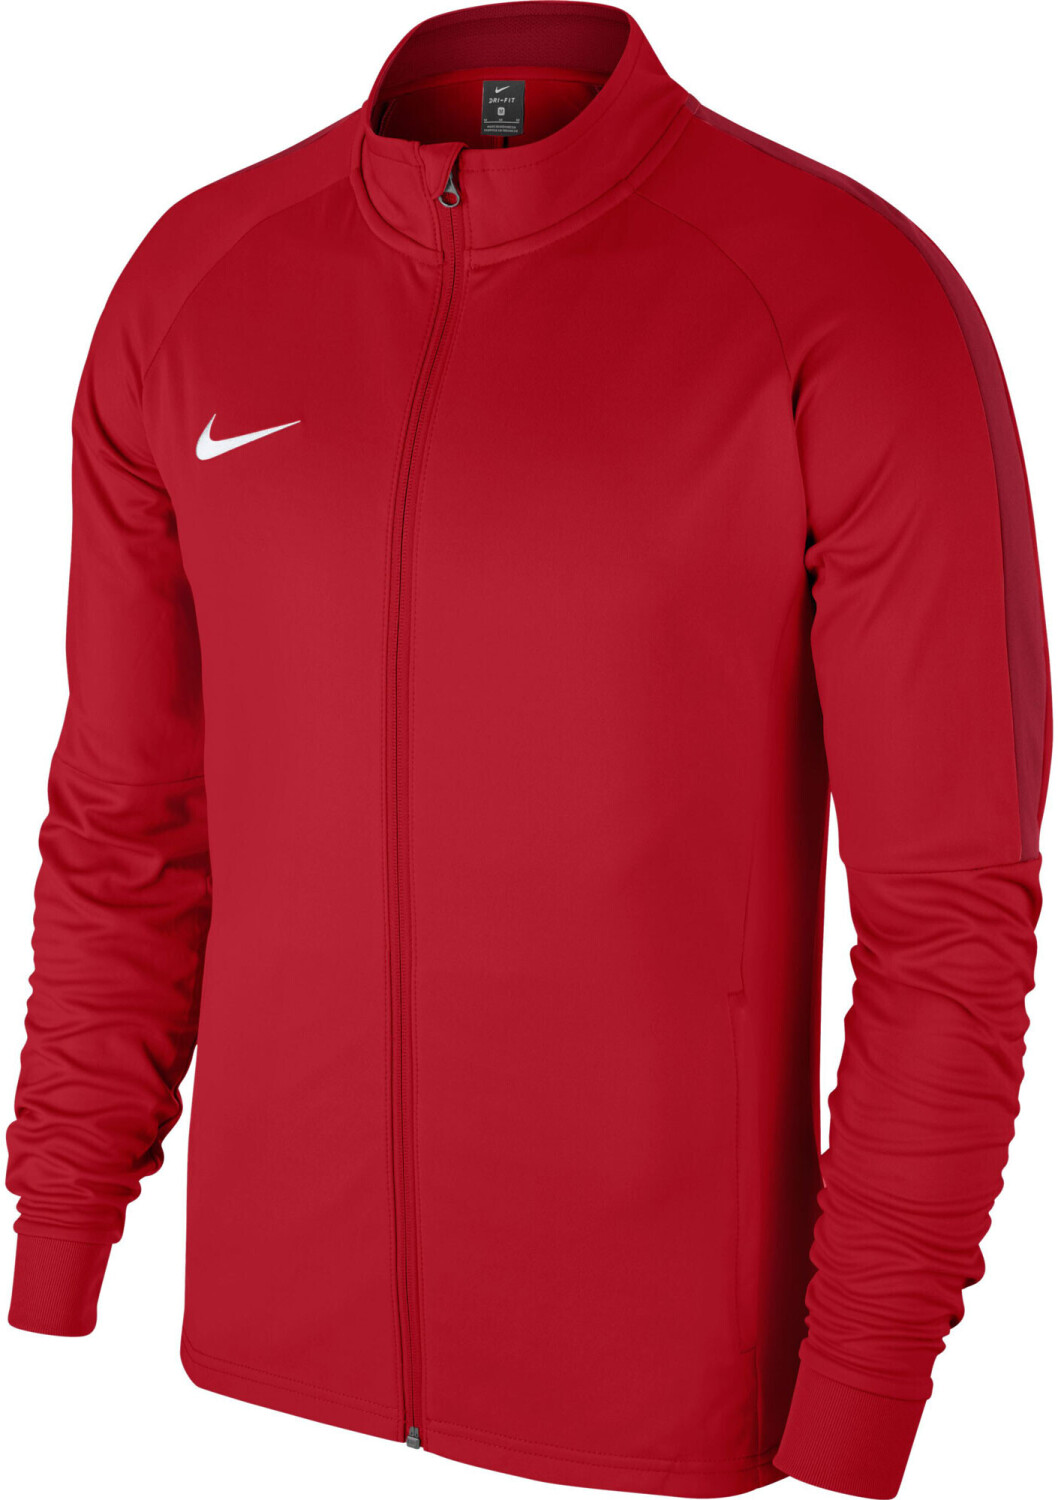 Nike Academy 18 Track Jacket Youth red